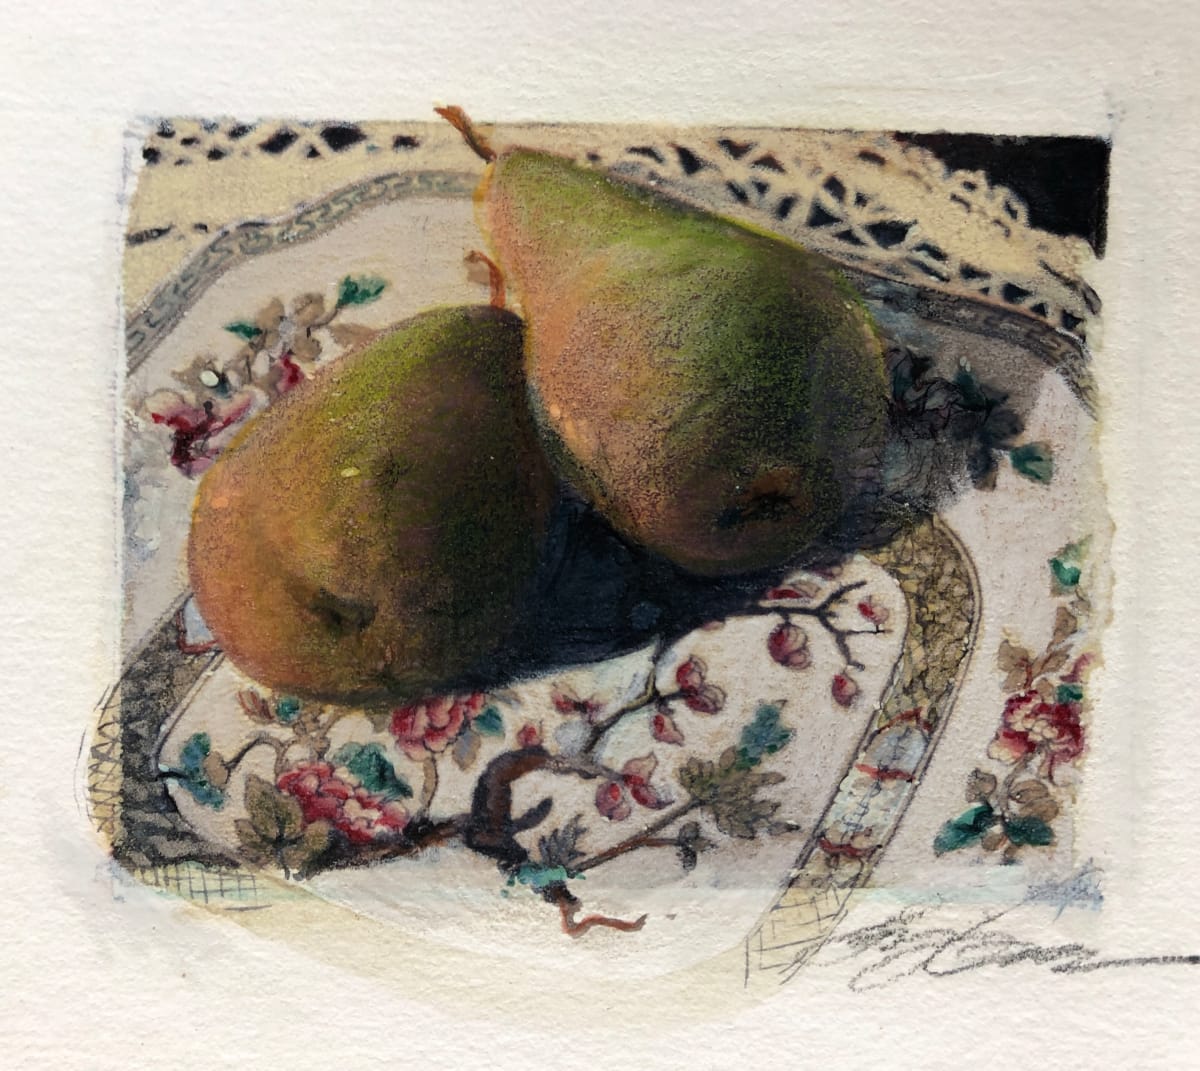 Pears on a  Plate by Karen Phillips~Curran  Image: Pears on a Plate